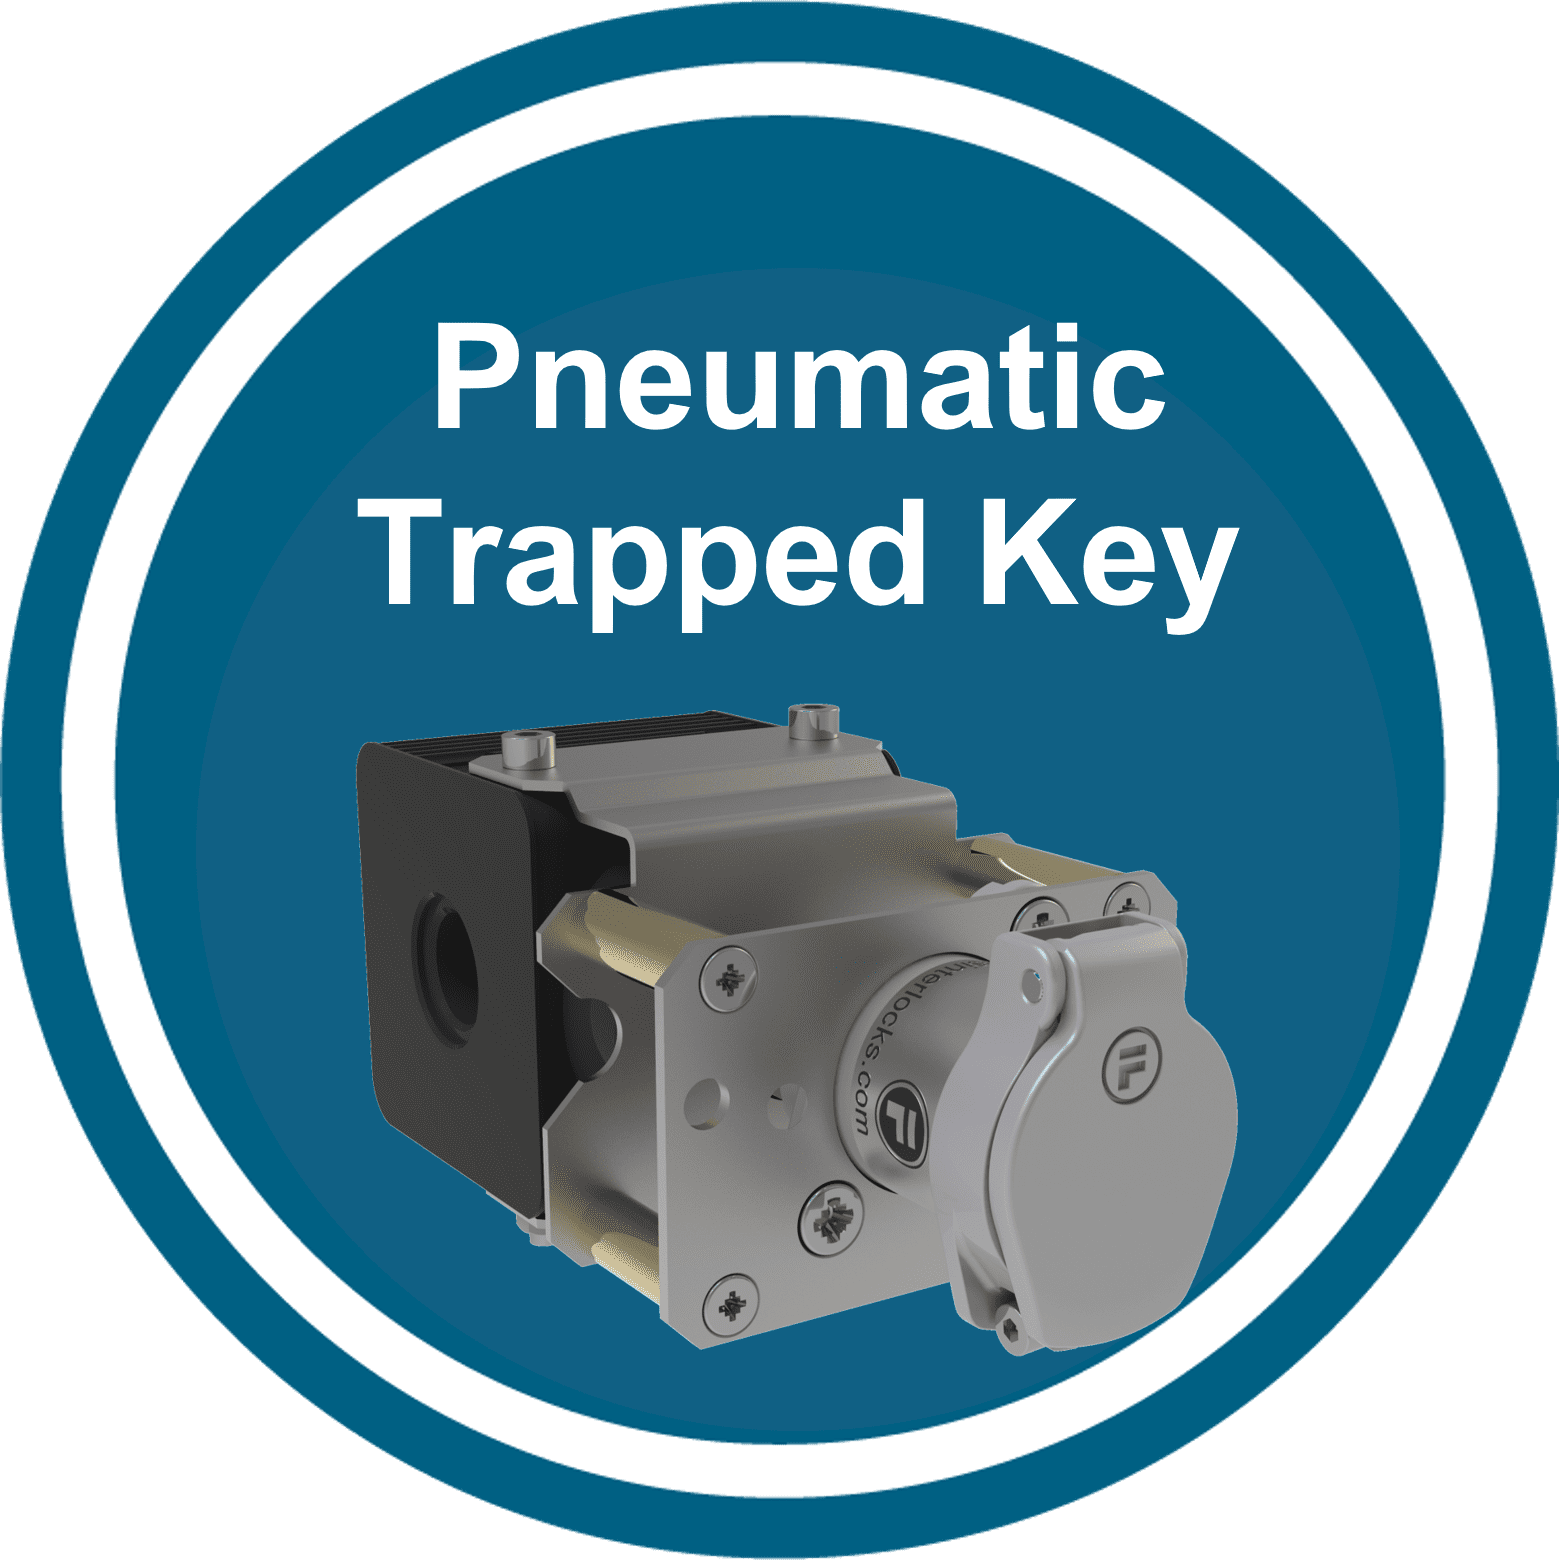 Pneumatic Trapped Key Isolation (PV PH PL PE PS)